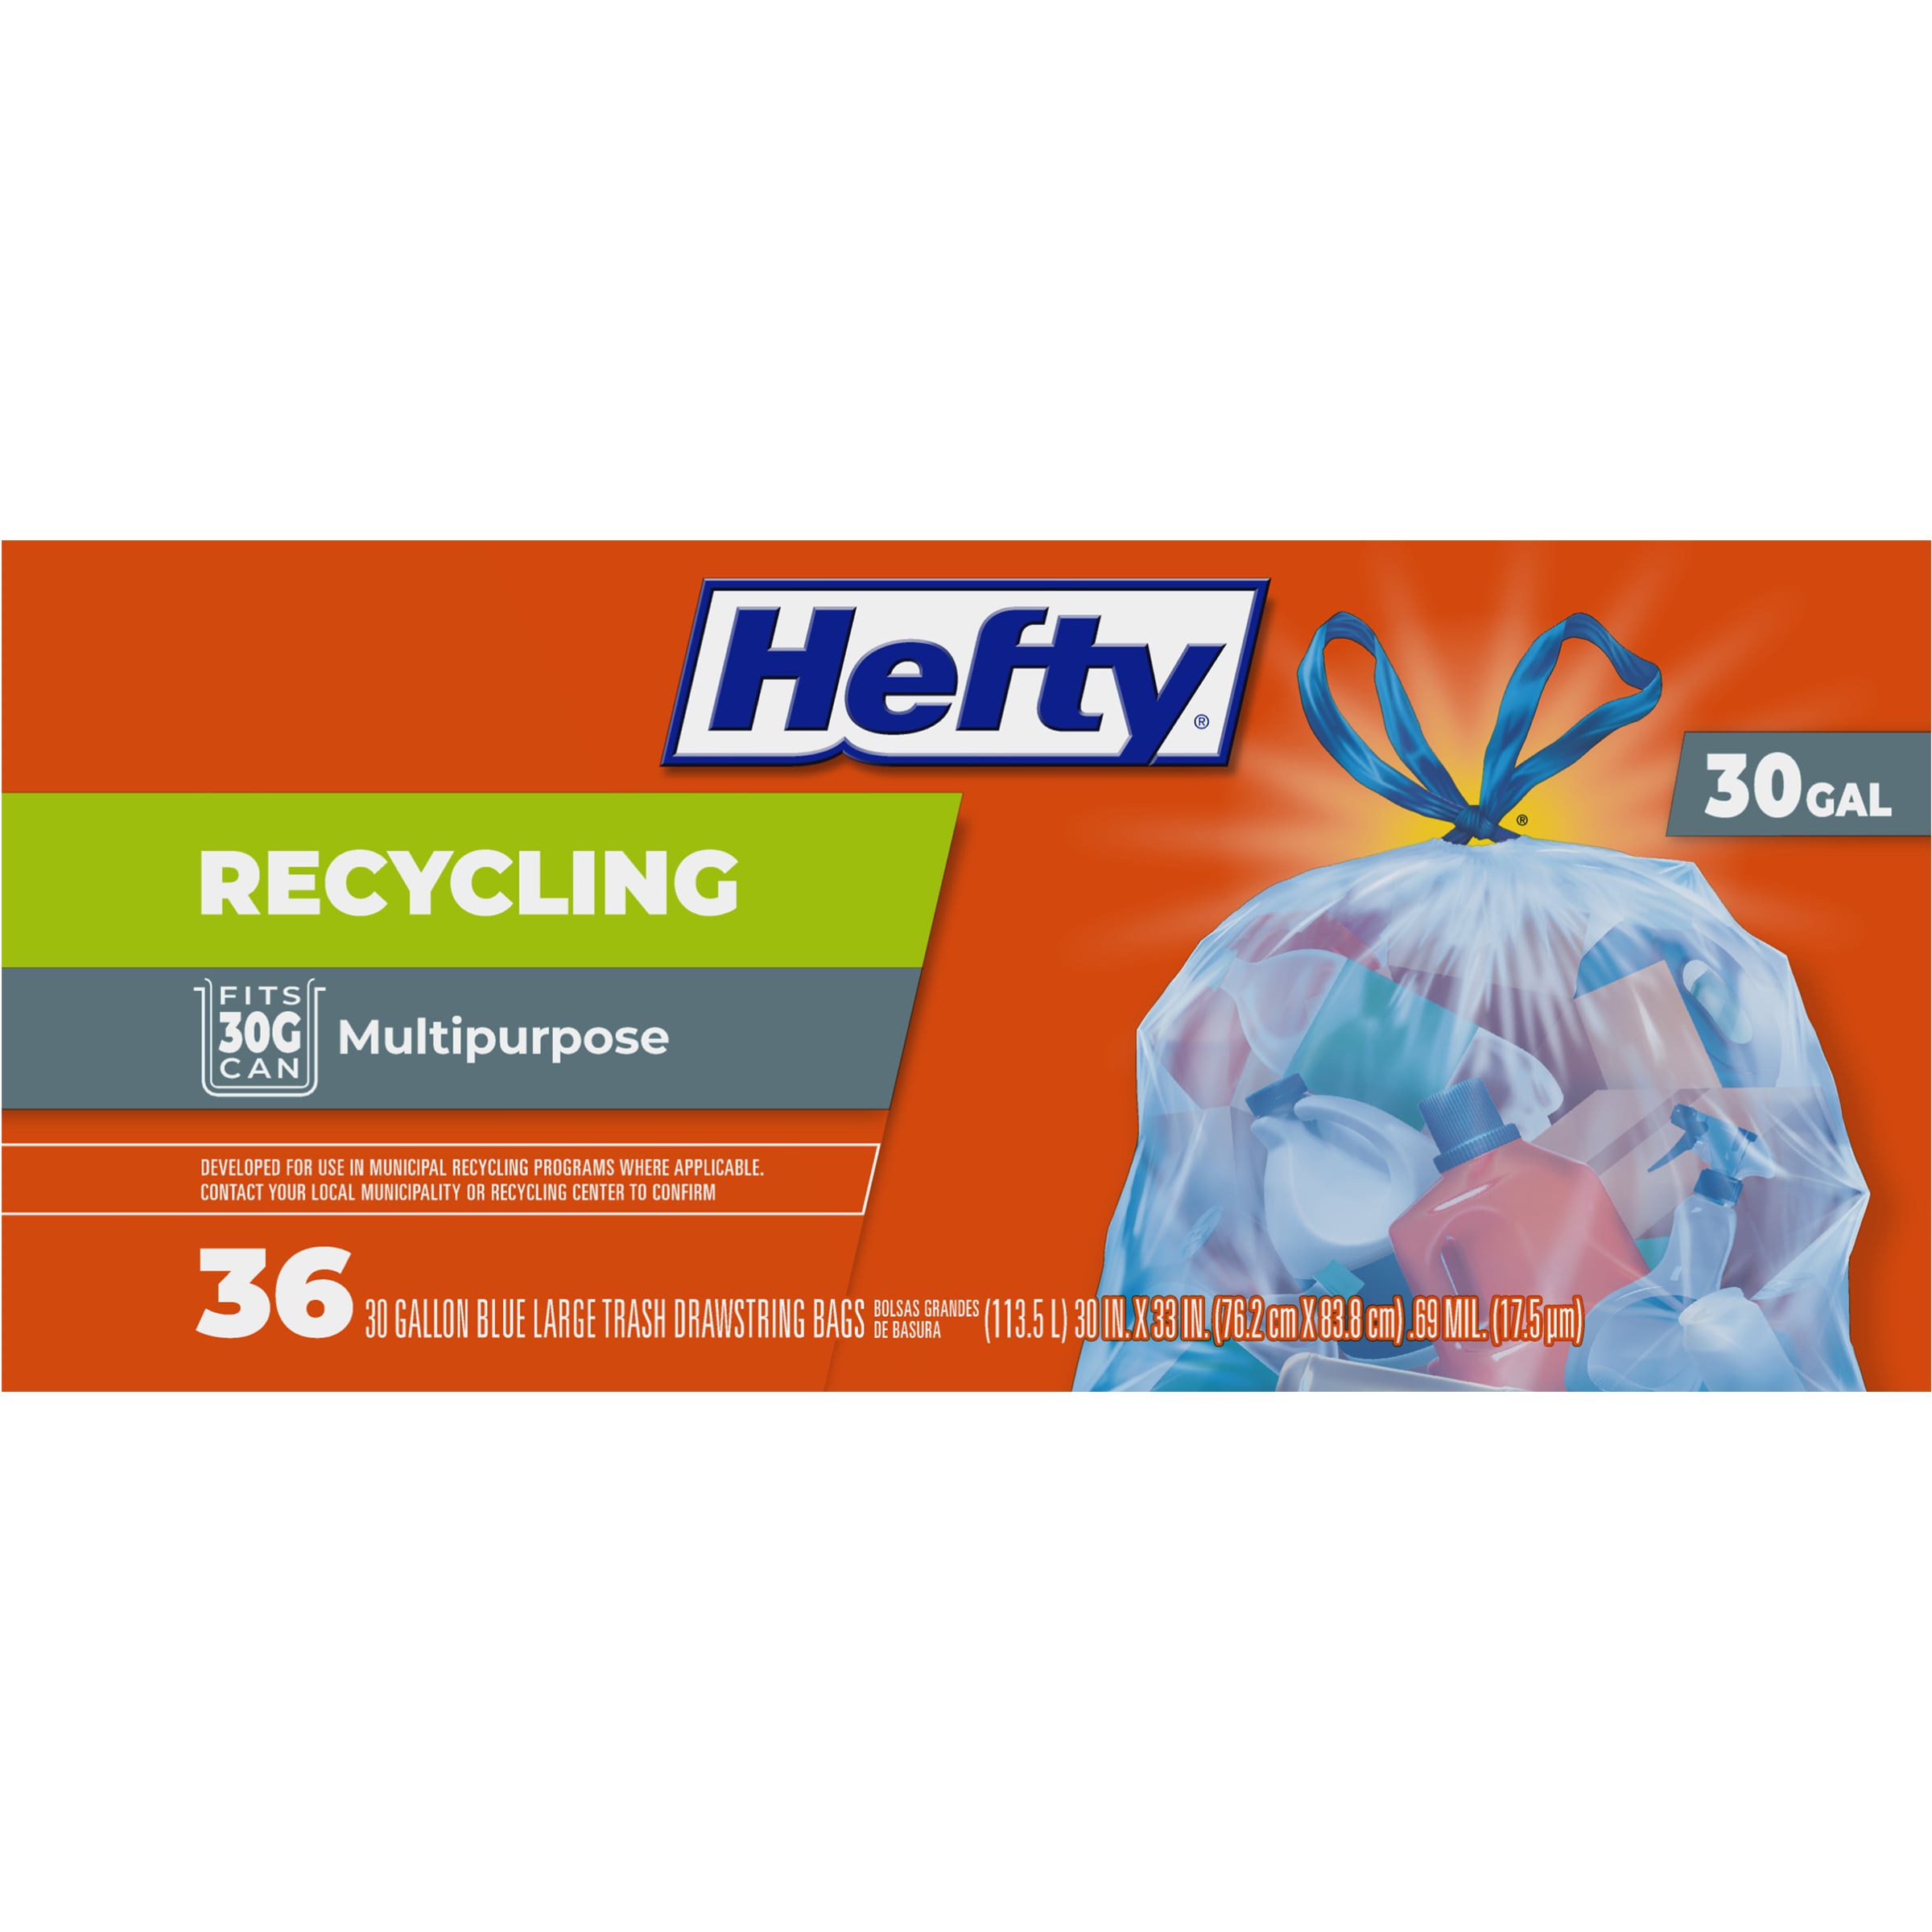 Hardy Bags 30 Gallon Large Blue Recycling Trash Bags, 8 ct